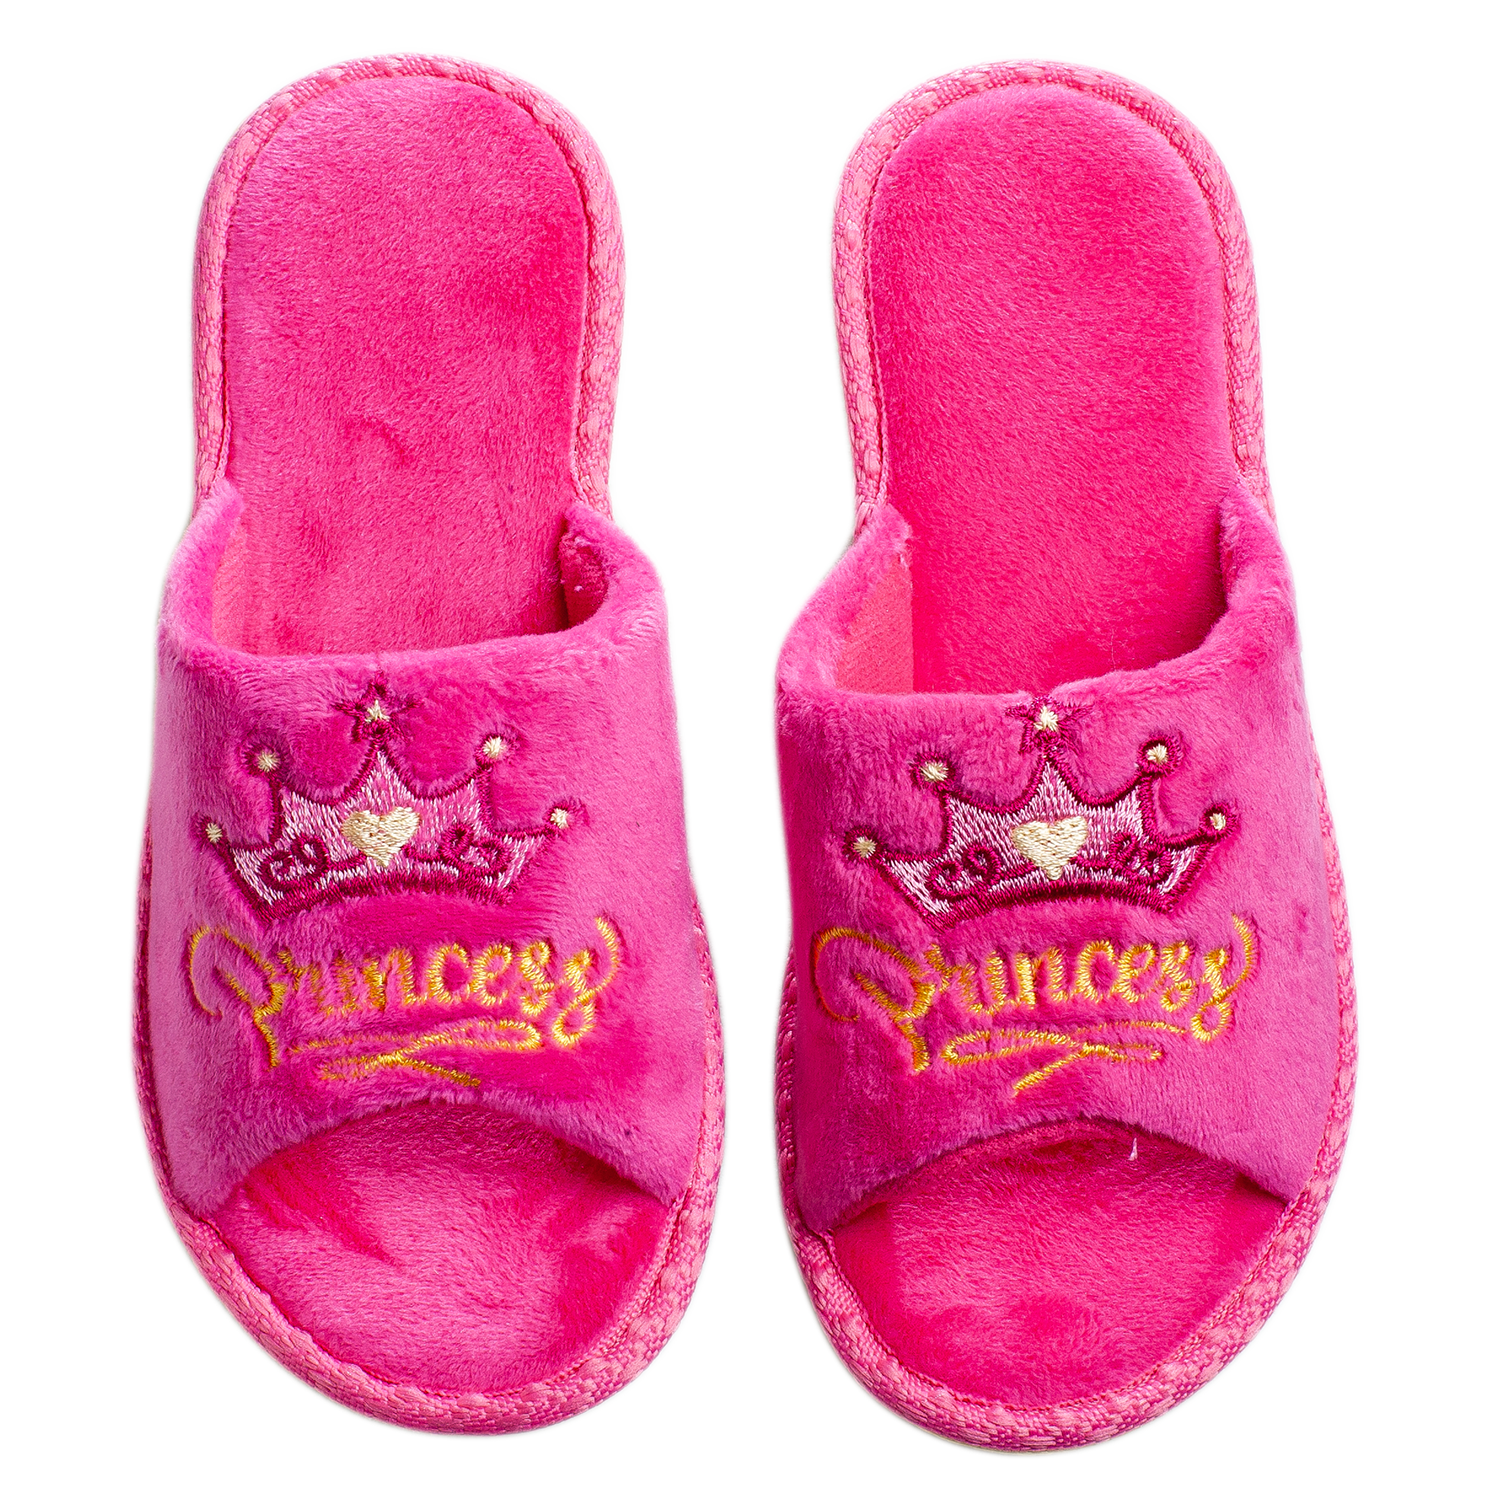 Children's velour slippers with embroidery - 2